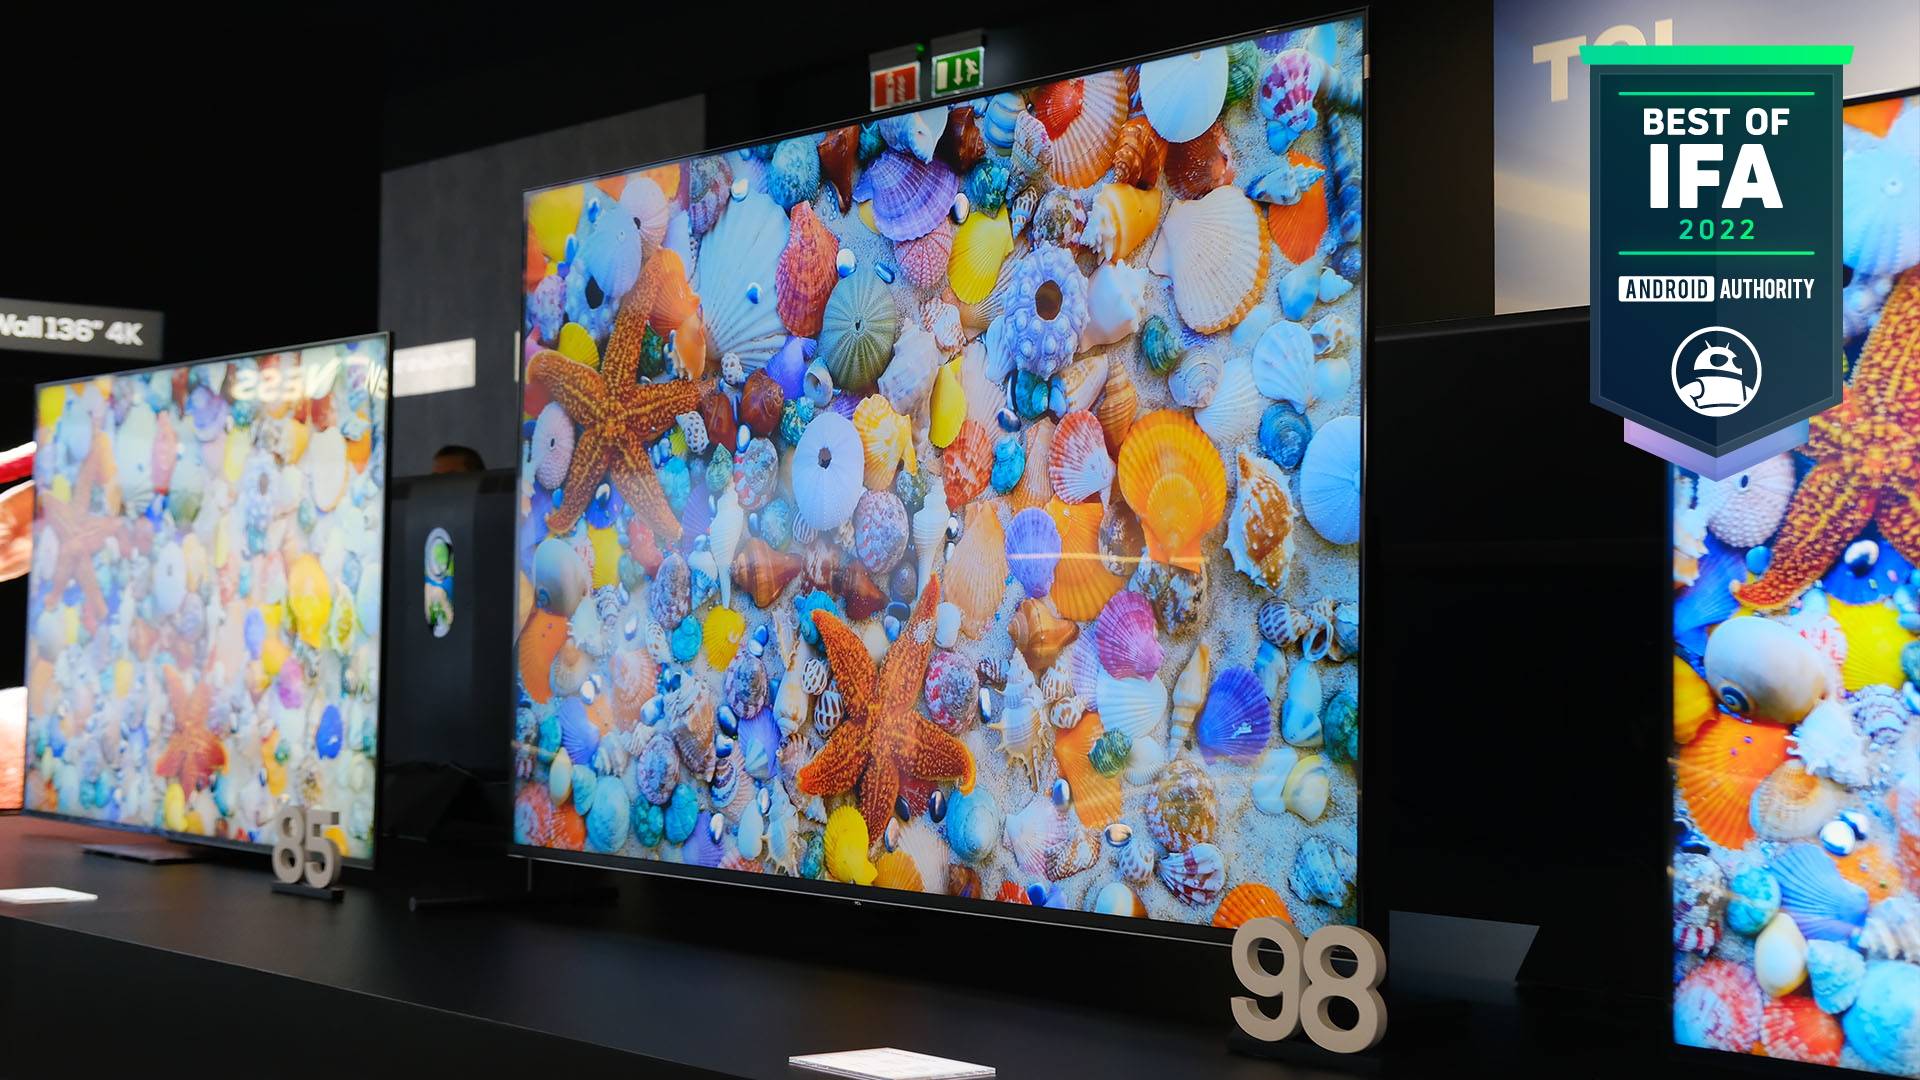 TCL 98 inch mini LED Best of IFA 2022 badged